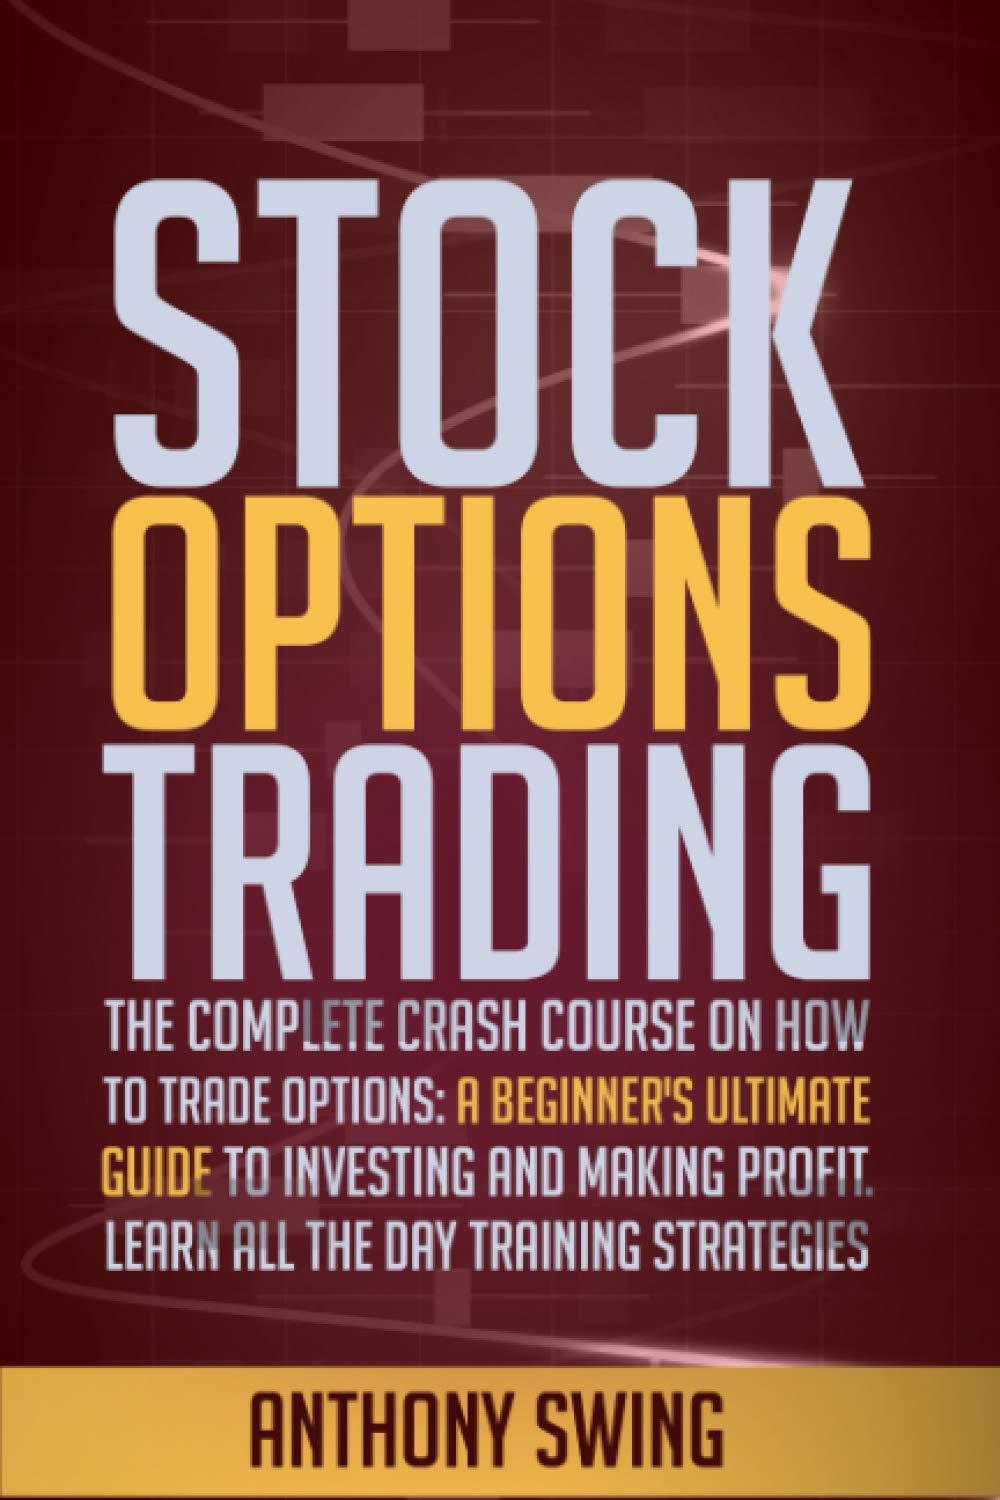 stock options trading the complete crash course on how to trade options a beginners ultimate guide to